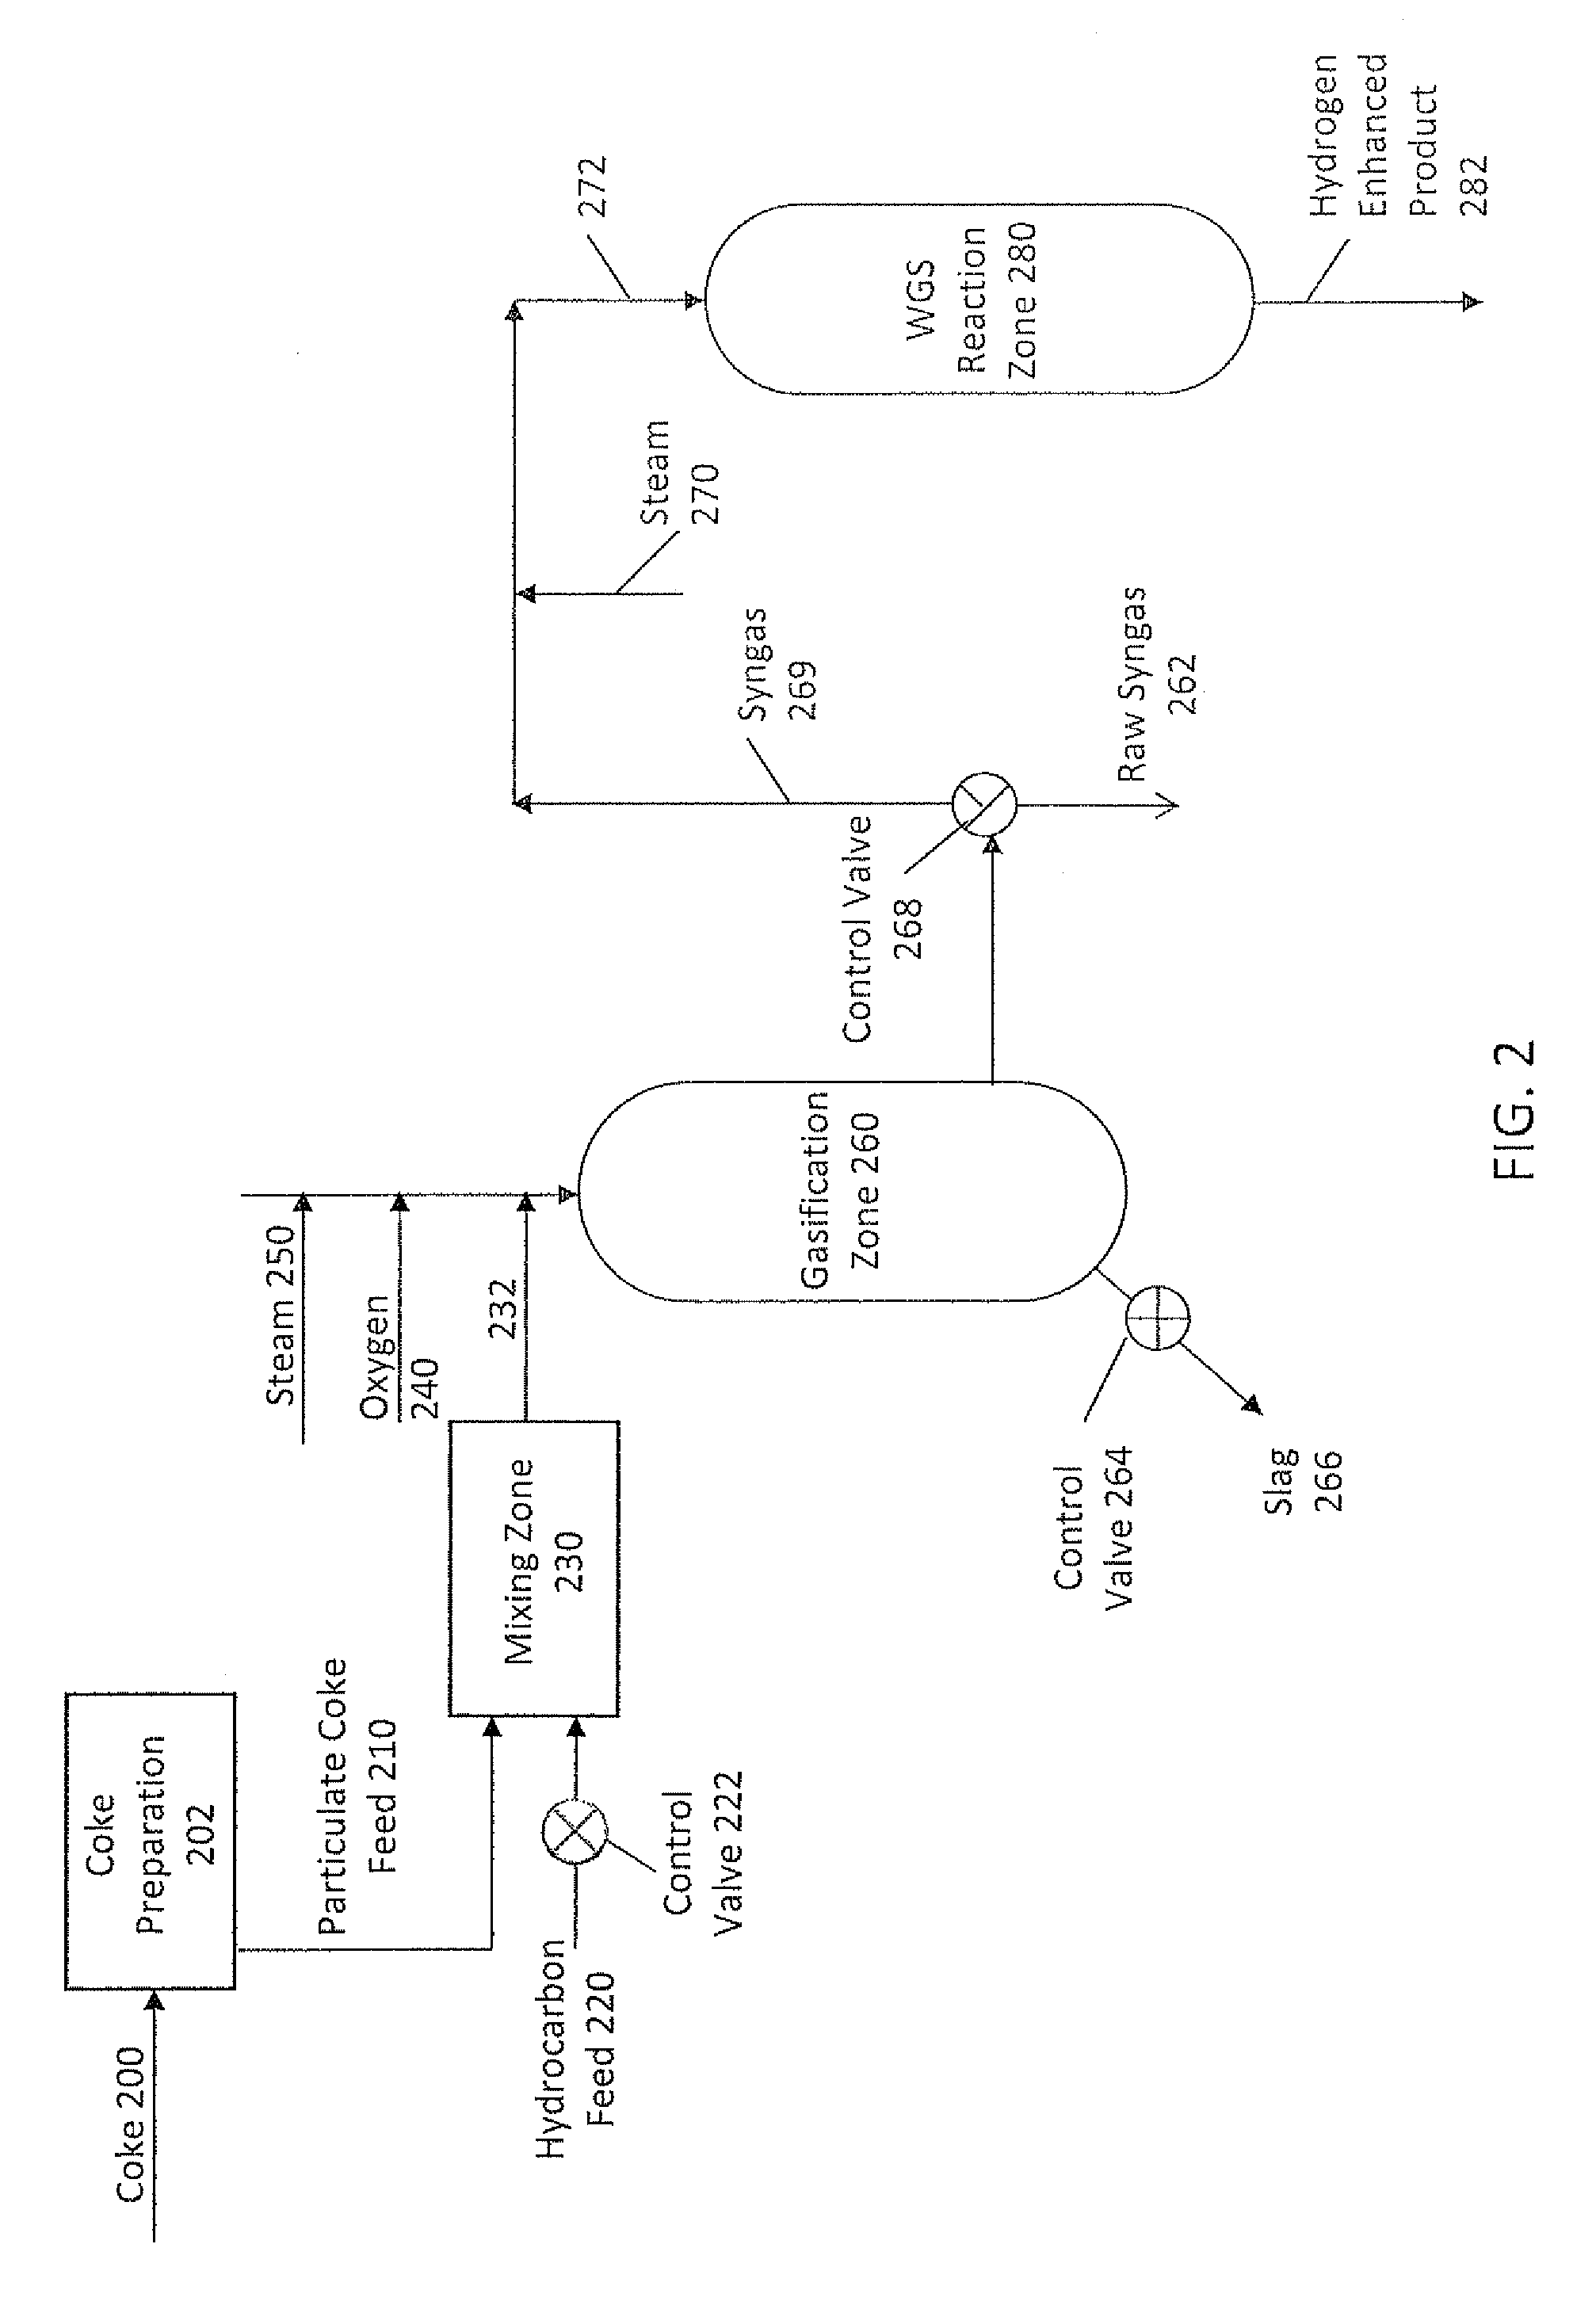 Process for the gasification of heavy residual oil with particulate coke from a delayed coking unit